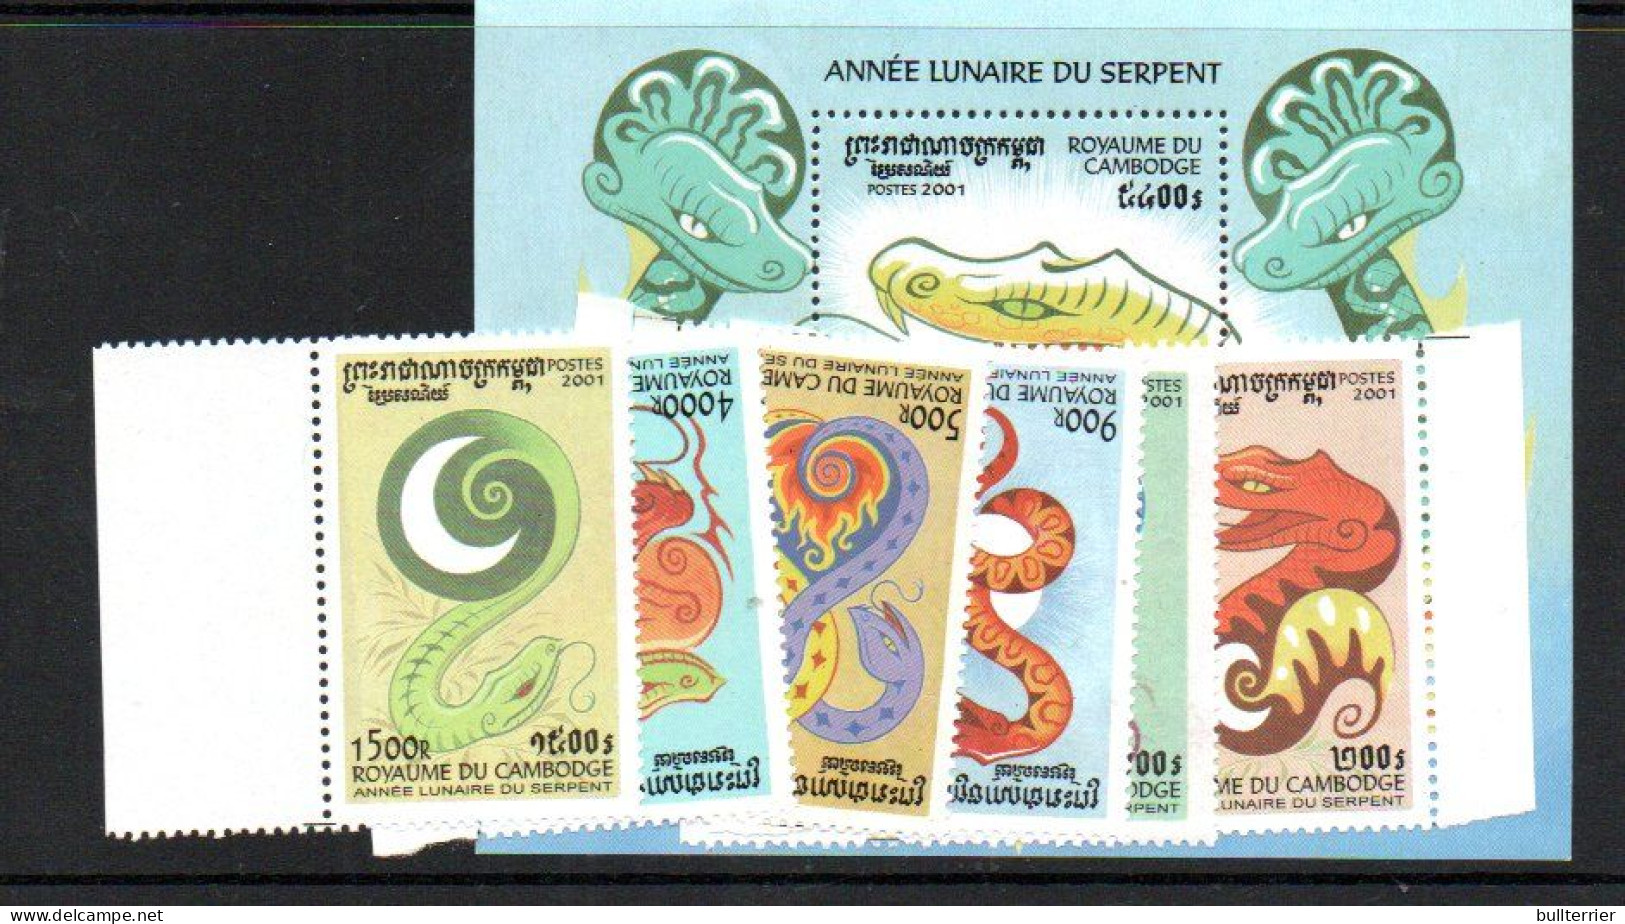 CAMBODIA - 2001- YEAR OF THE SNAKE SET OF  6 + SOUVENIR SHEET  MINT NEVER HINGED SG CAT £14.10 - Cambodia